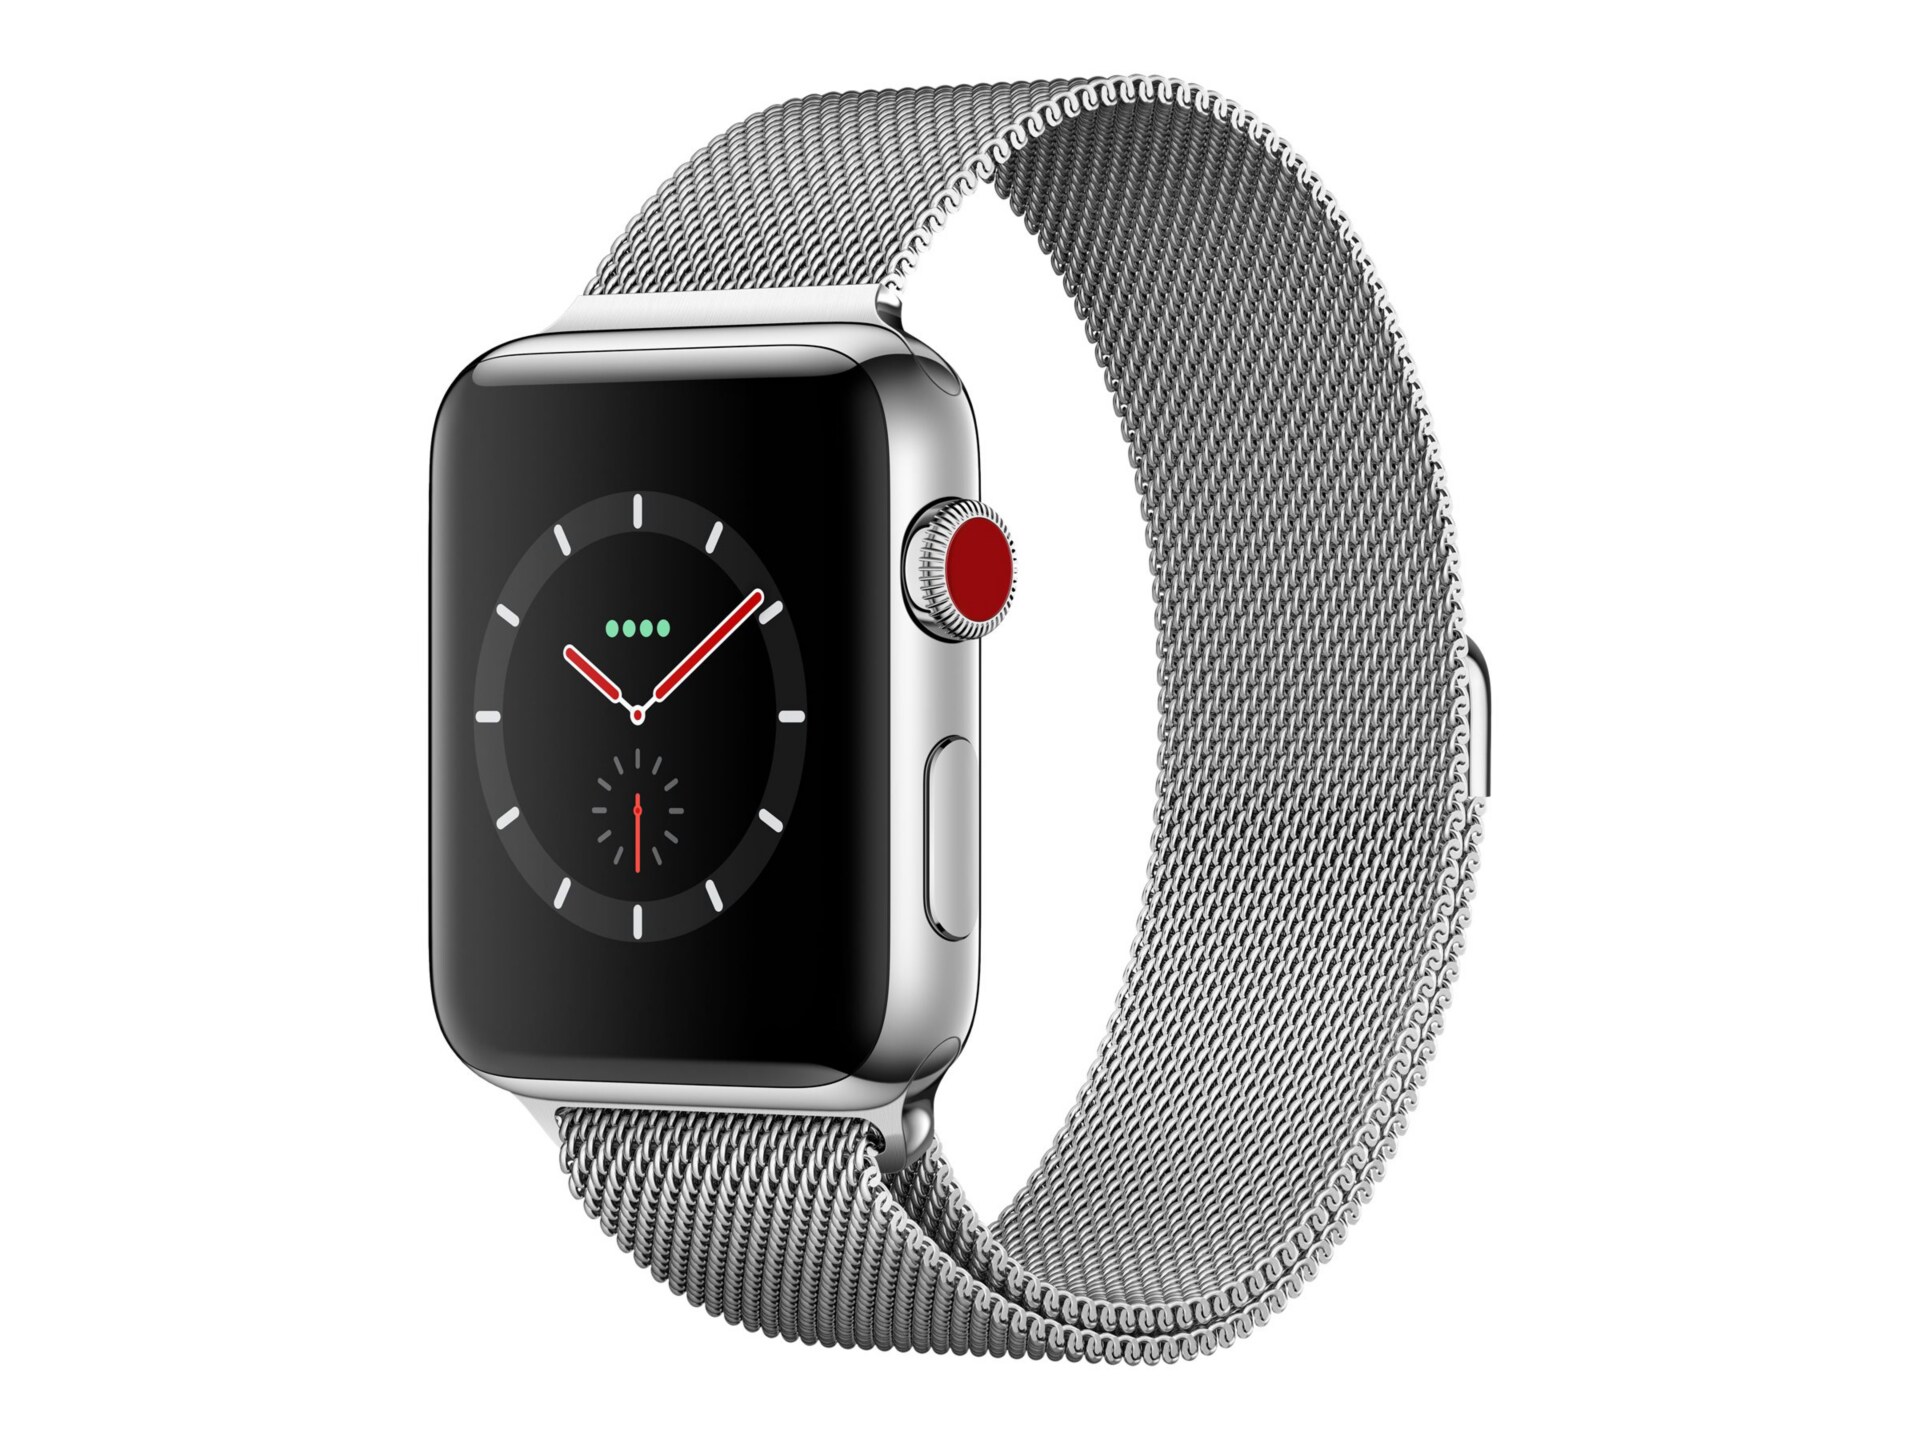 Apple Watch Series 3 (GPS + Cellular) - stainless steel - smart watch with milanese loop - 16 GB - not specified